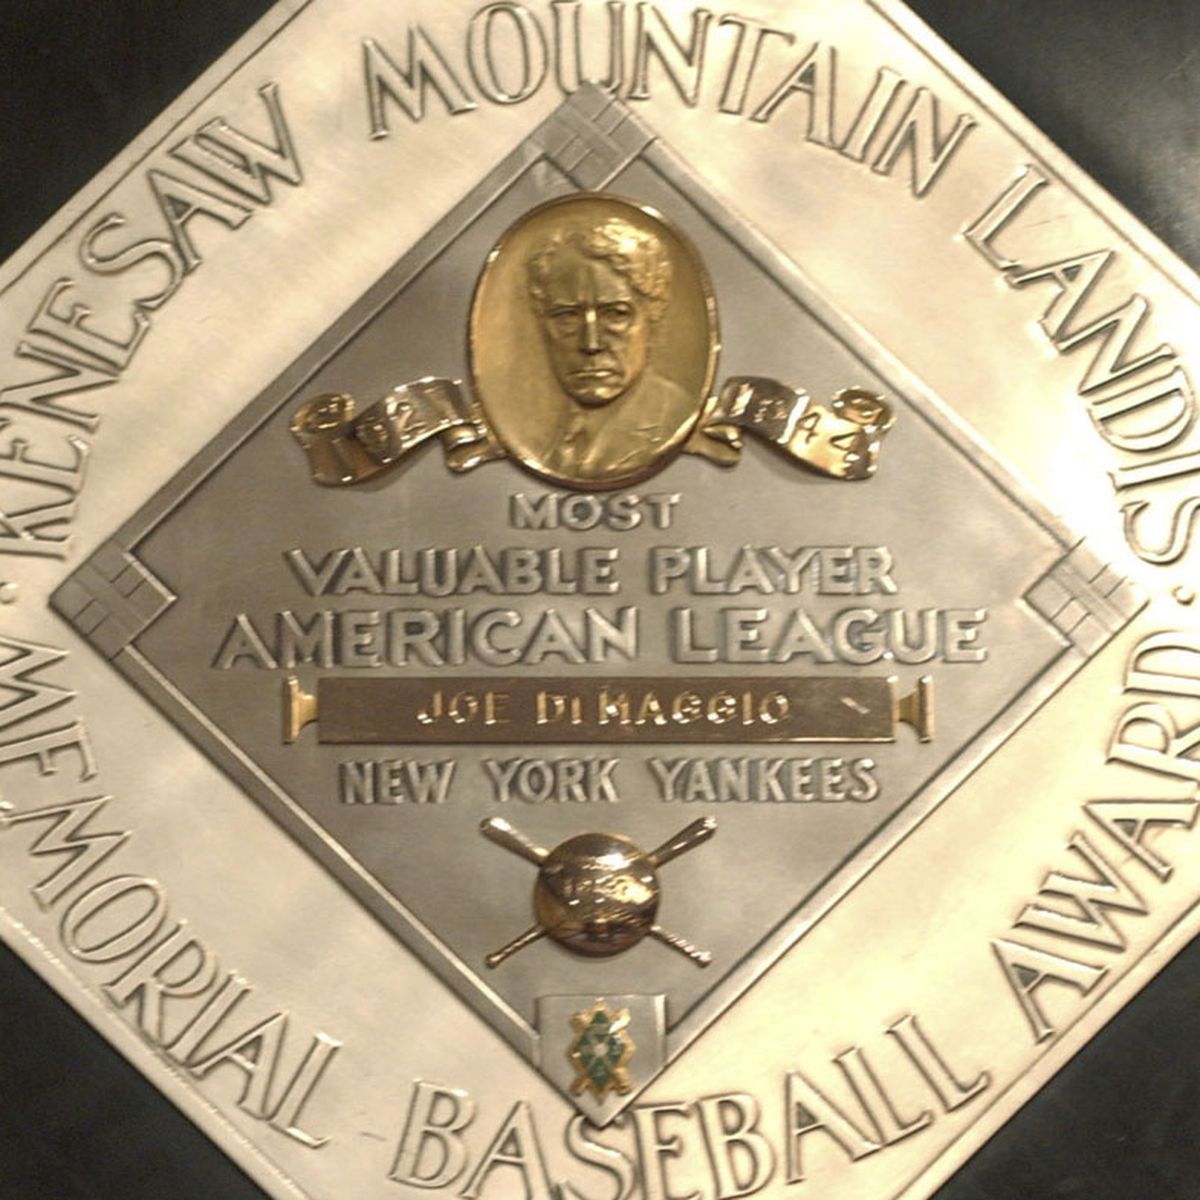 Kenesaw Mountain Landis' name removed from MVP trophies